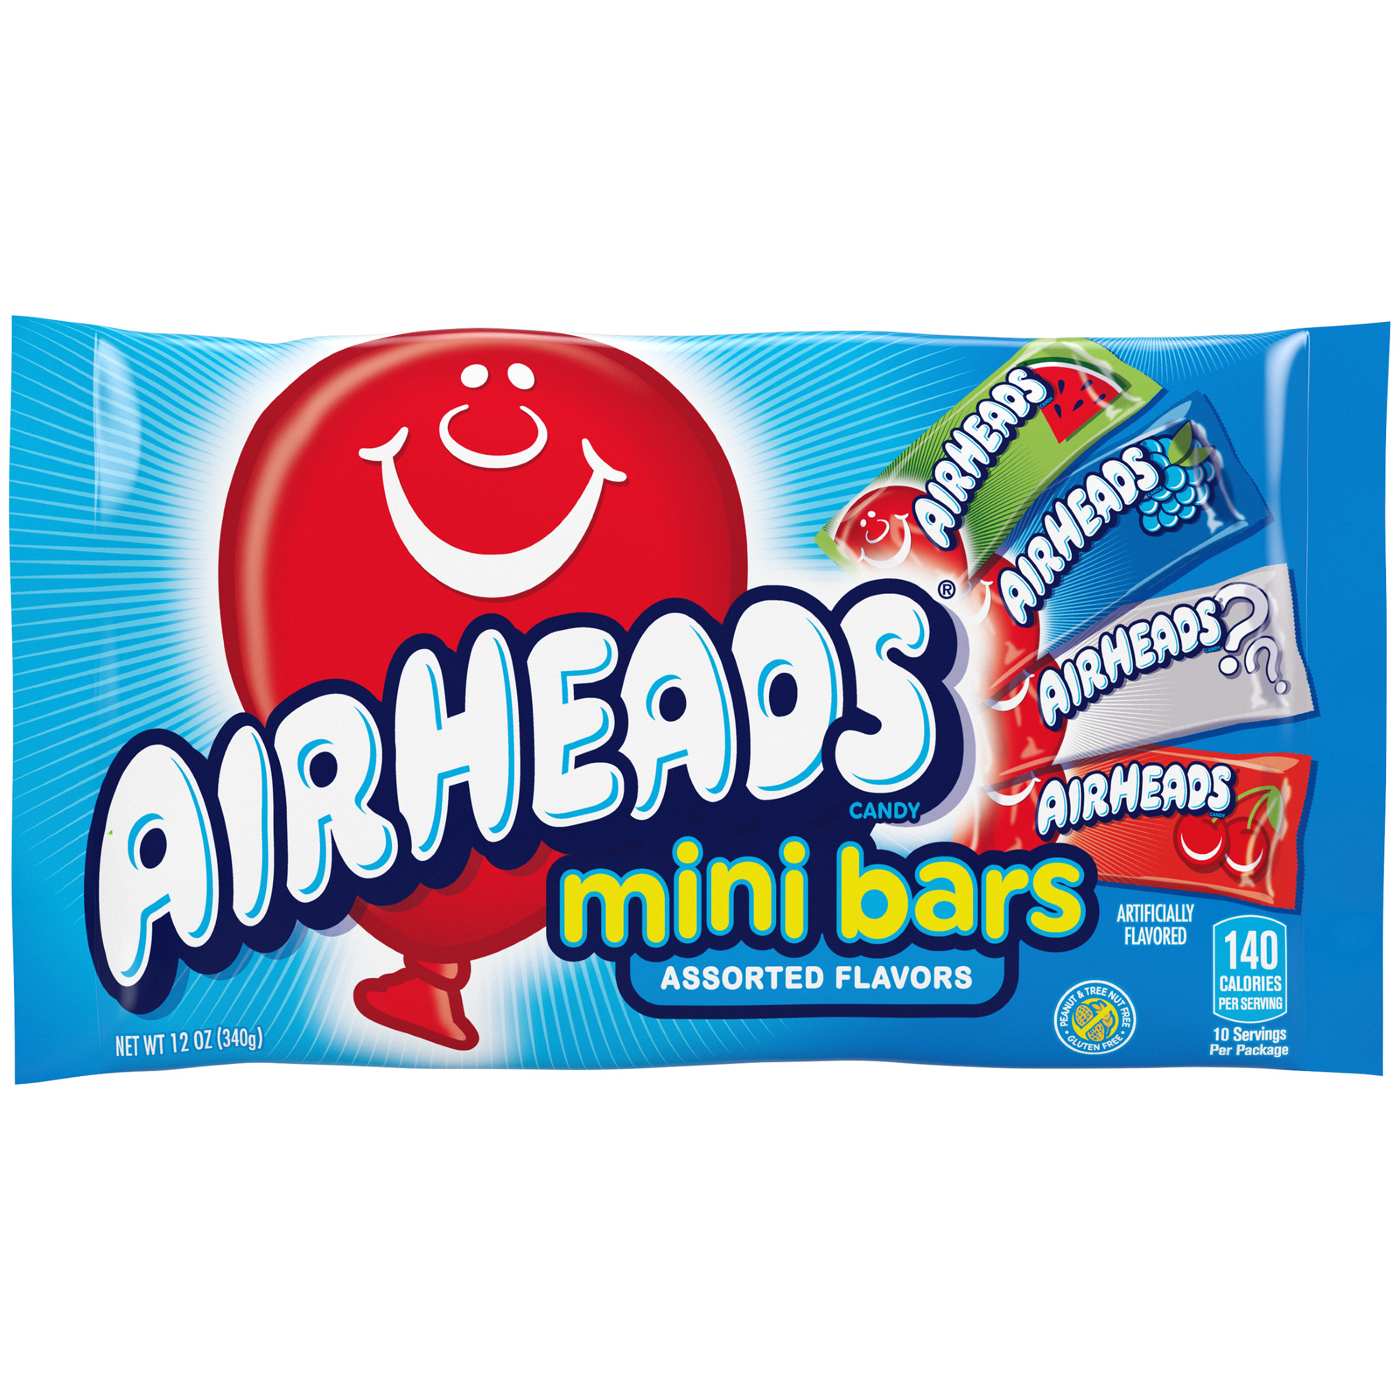 Airheads Assorted Flavors Mini Bars Candy; image 1 of 2